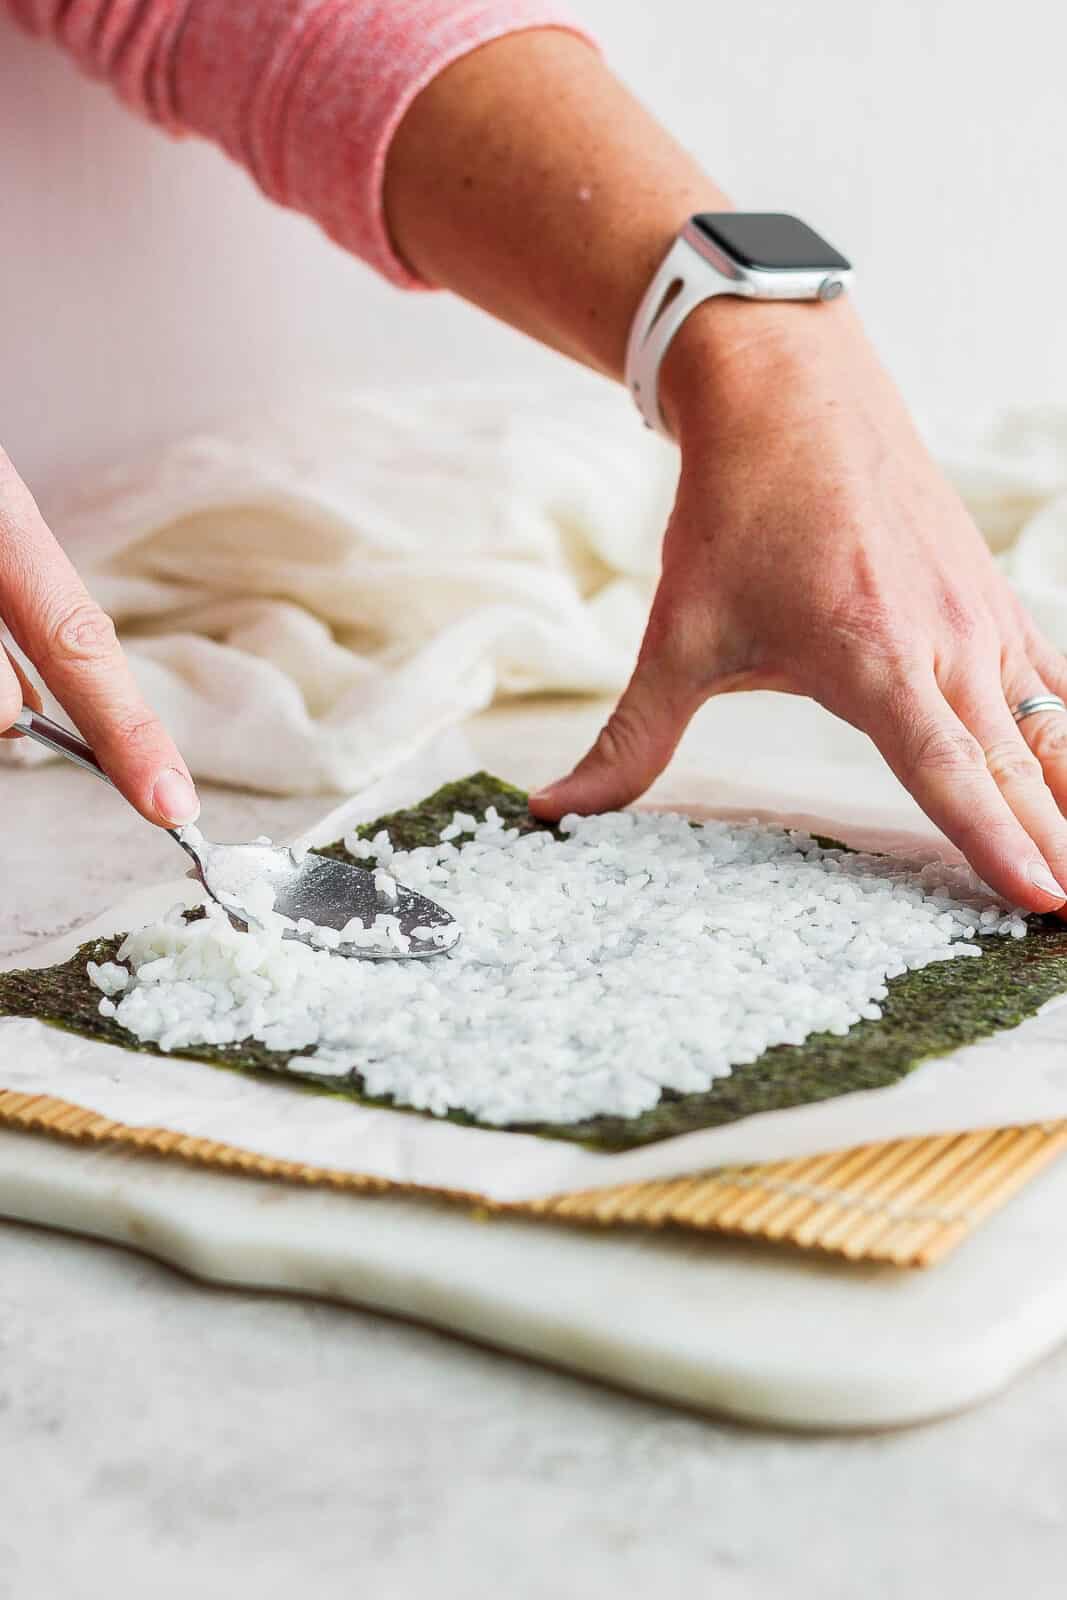 Using a spoon to spread a thin layer of rice on the nori sheet.